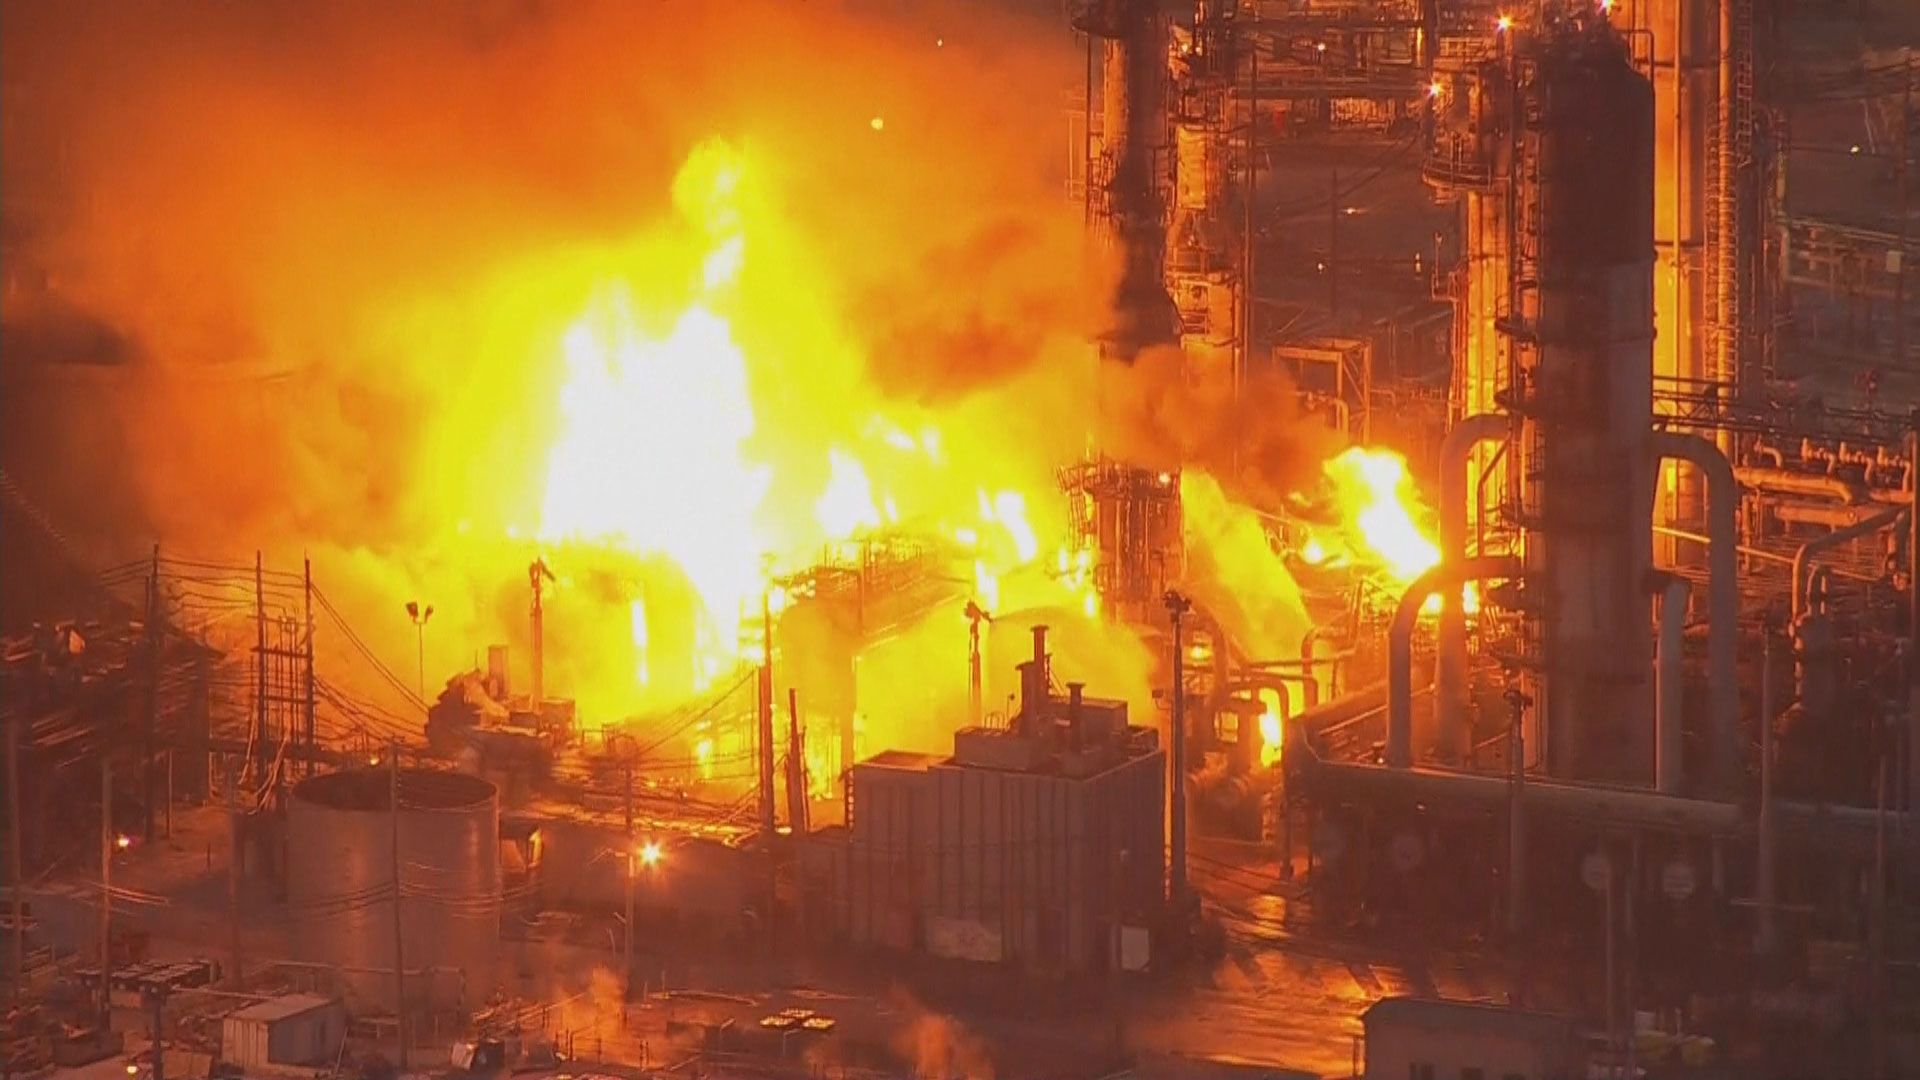 Watch the exact moment of the shocking explosion at a refinery in South Philadelphia